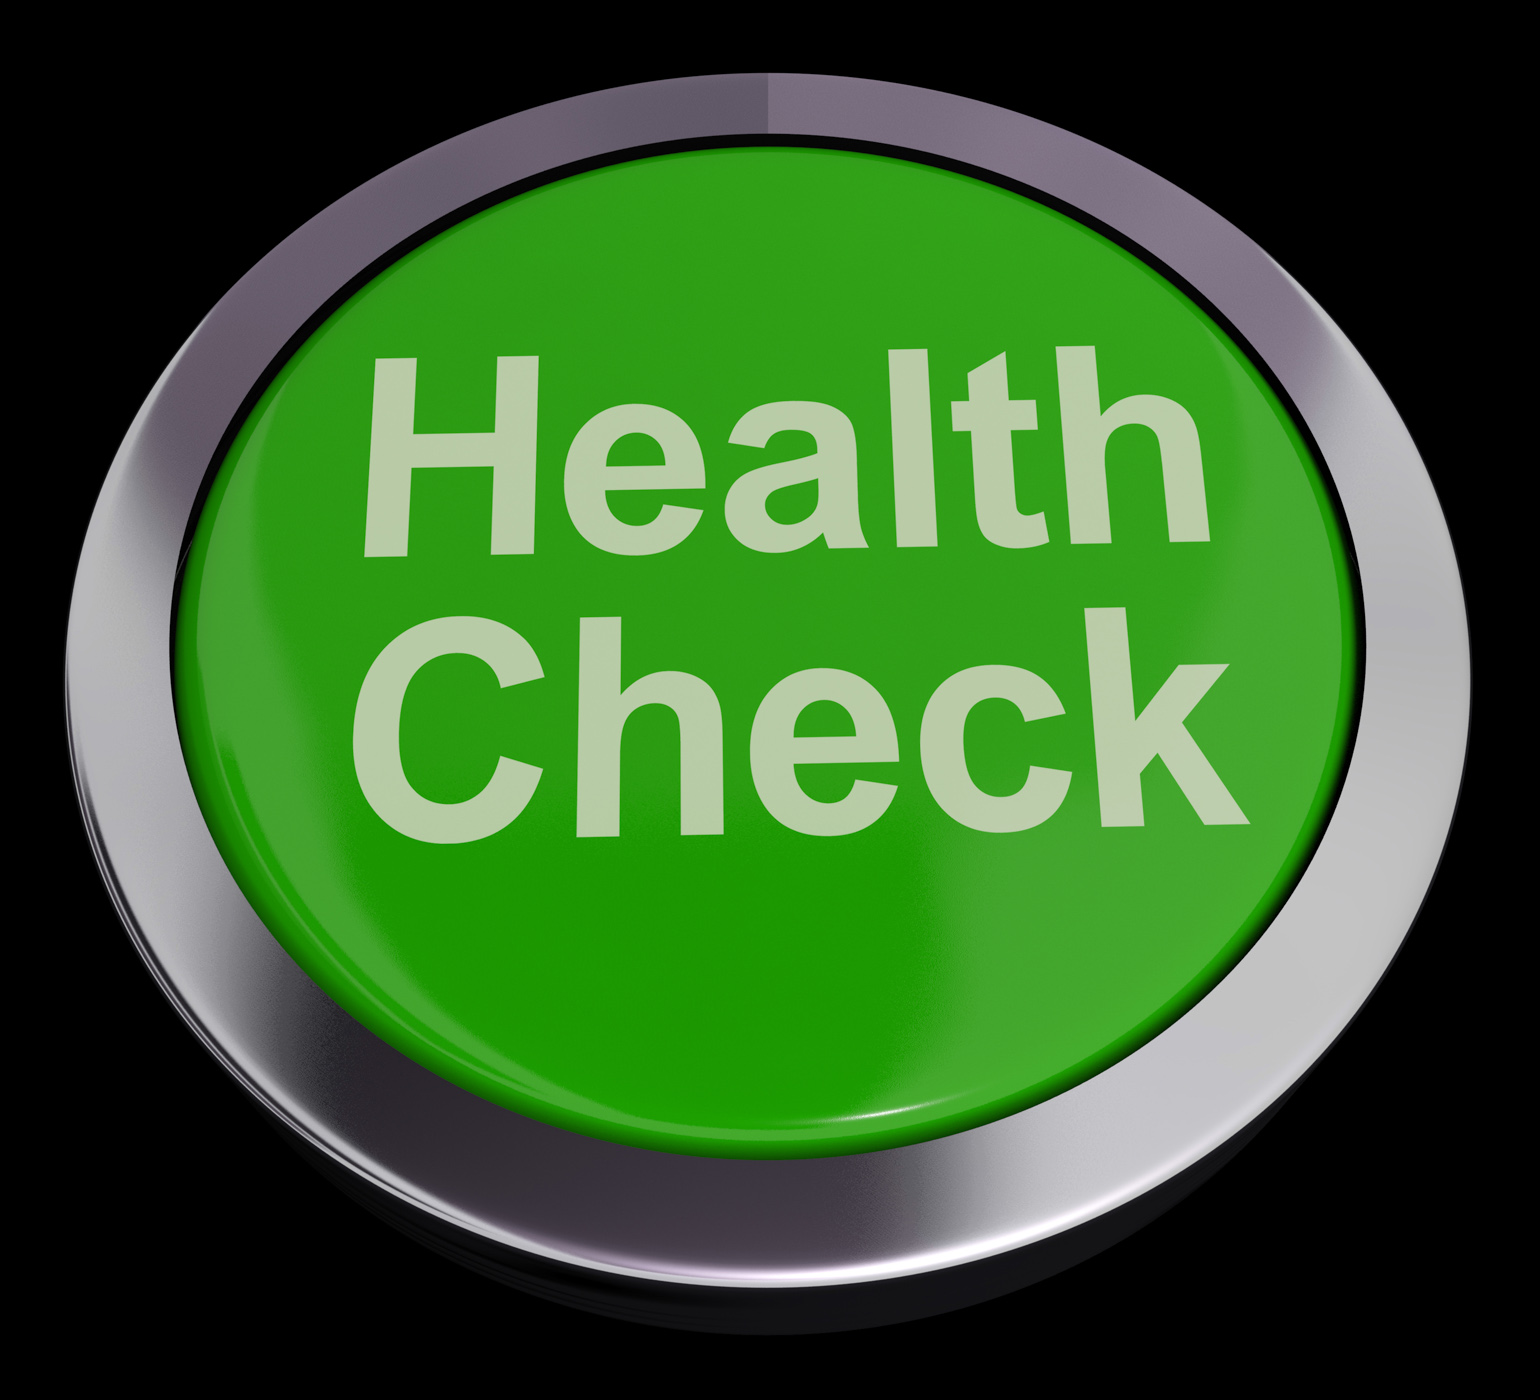 Health check button in green showing medical examination photo